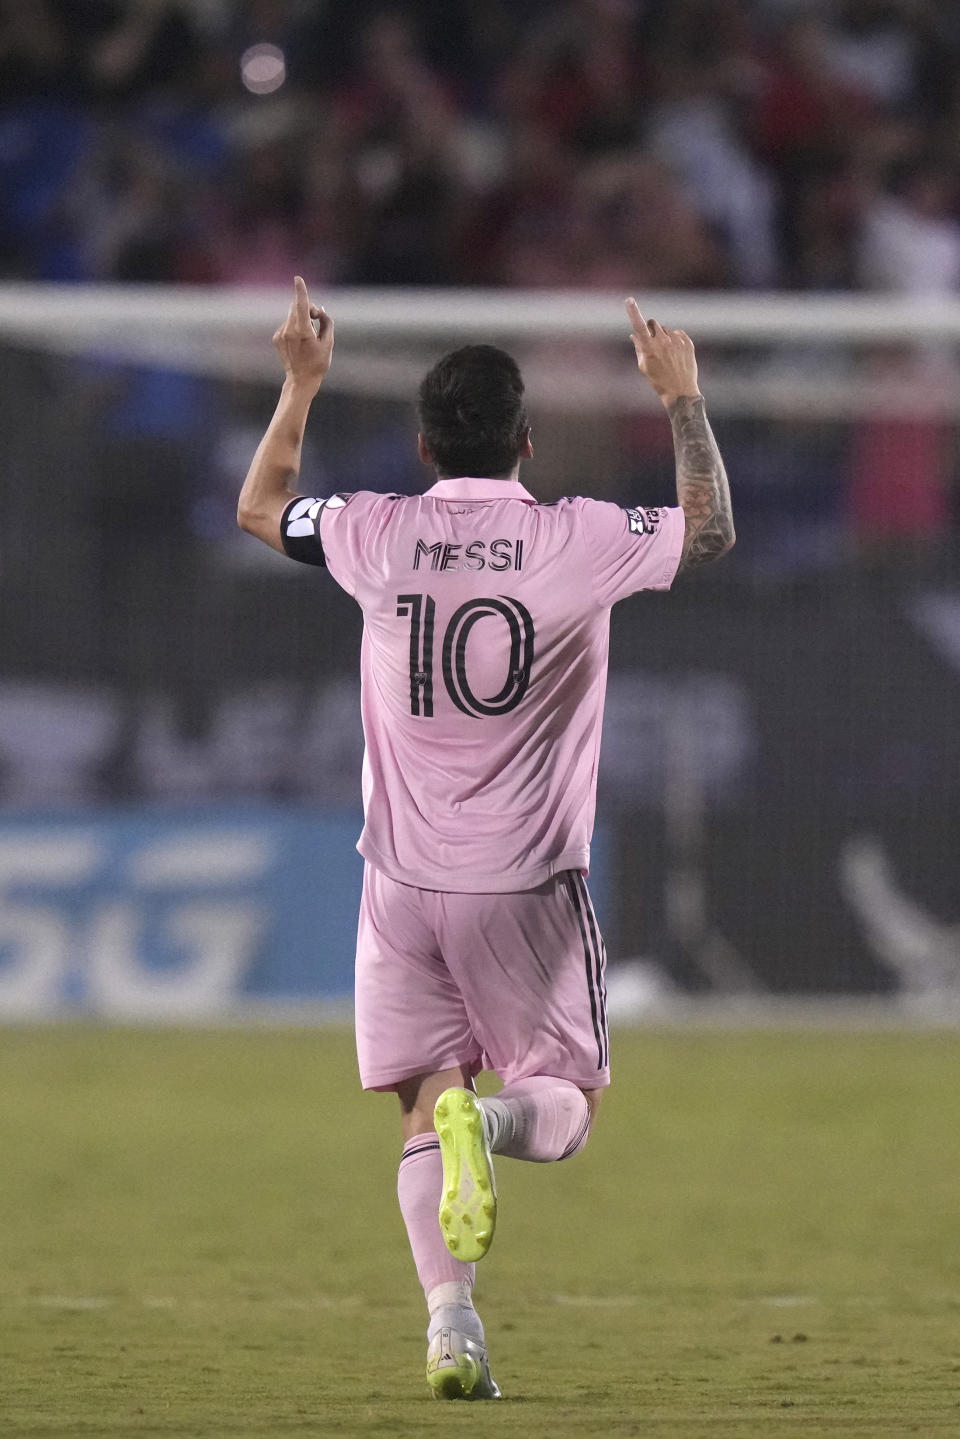 Inter Miami forward Lionel Messi celebrates his goal against DC Dallas during the second half of a Leagues Cup soccer match Sunday, Aug. 6, 2023, in Frisco, Texas. (AP Photo/LM Otero)